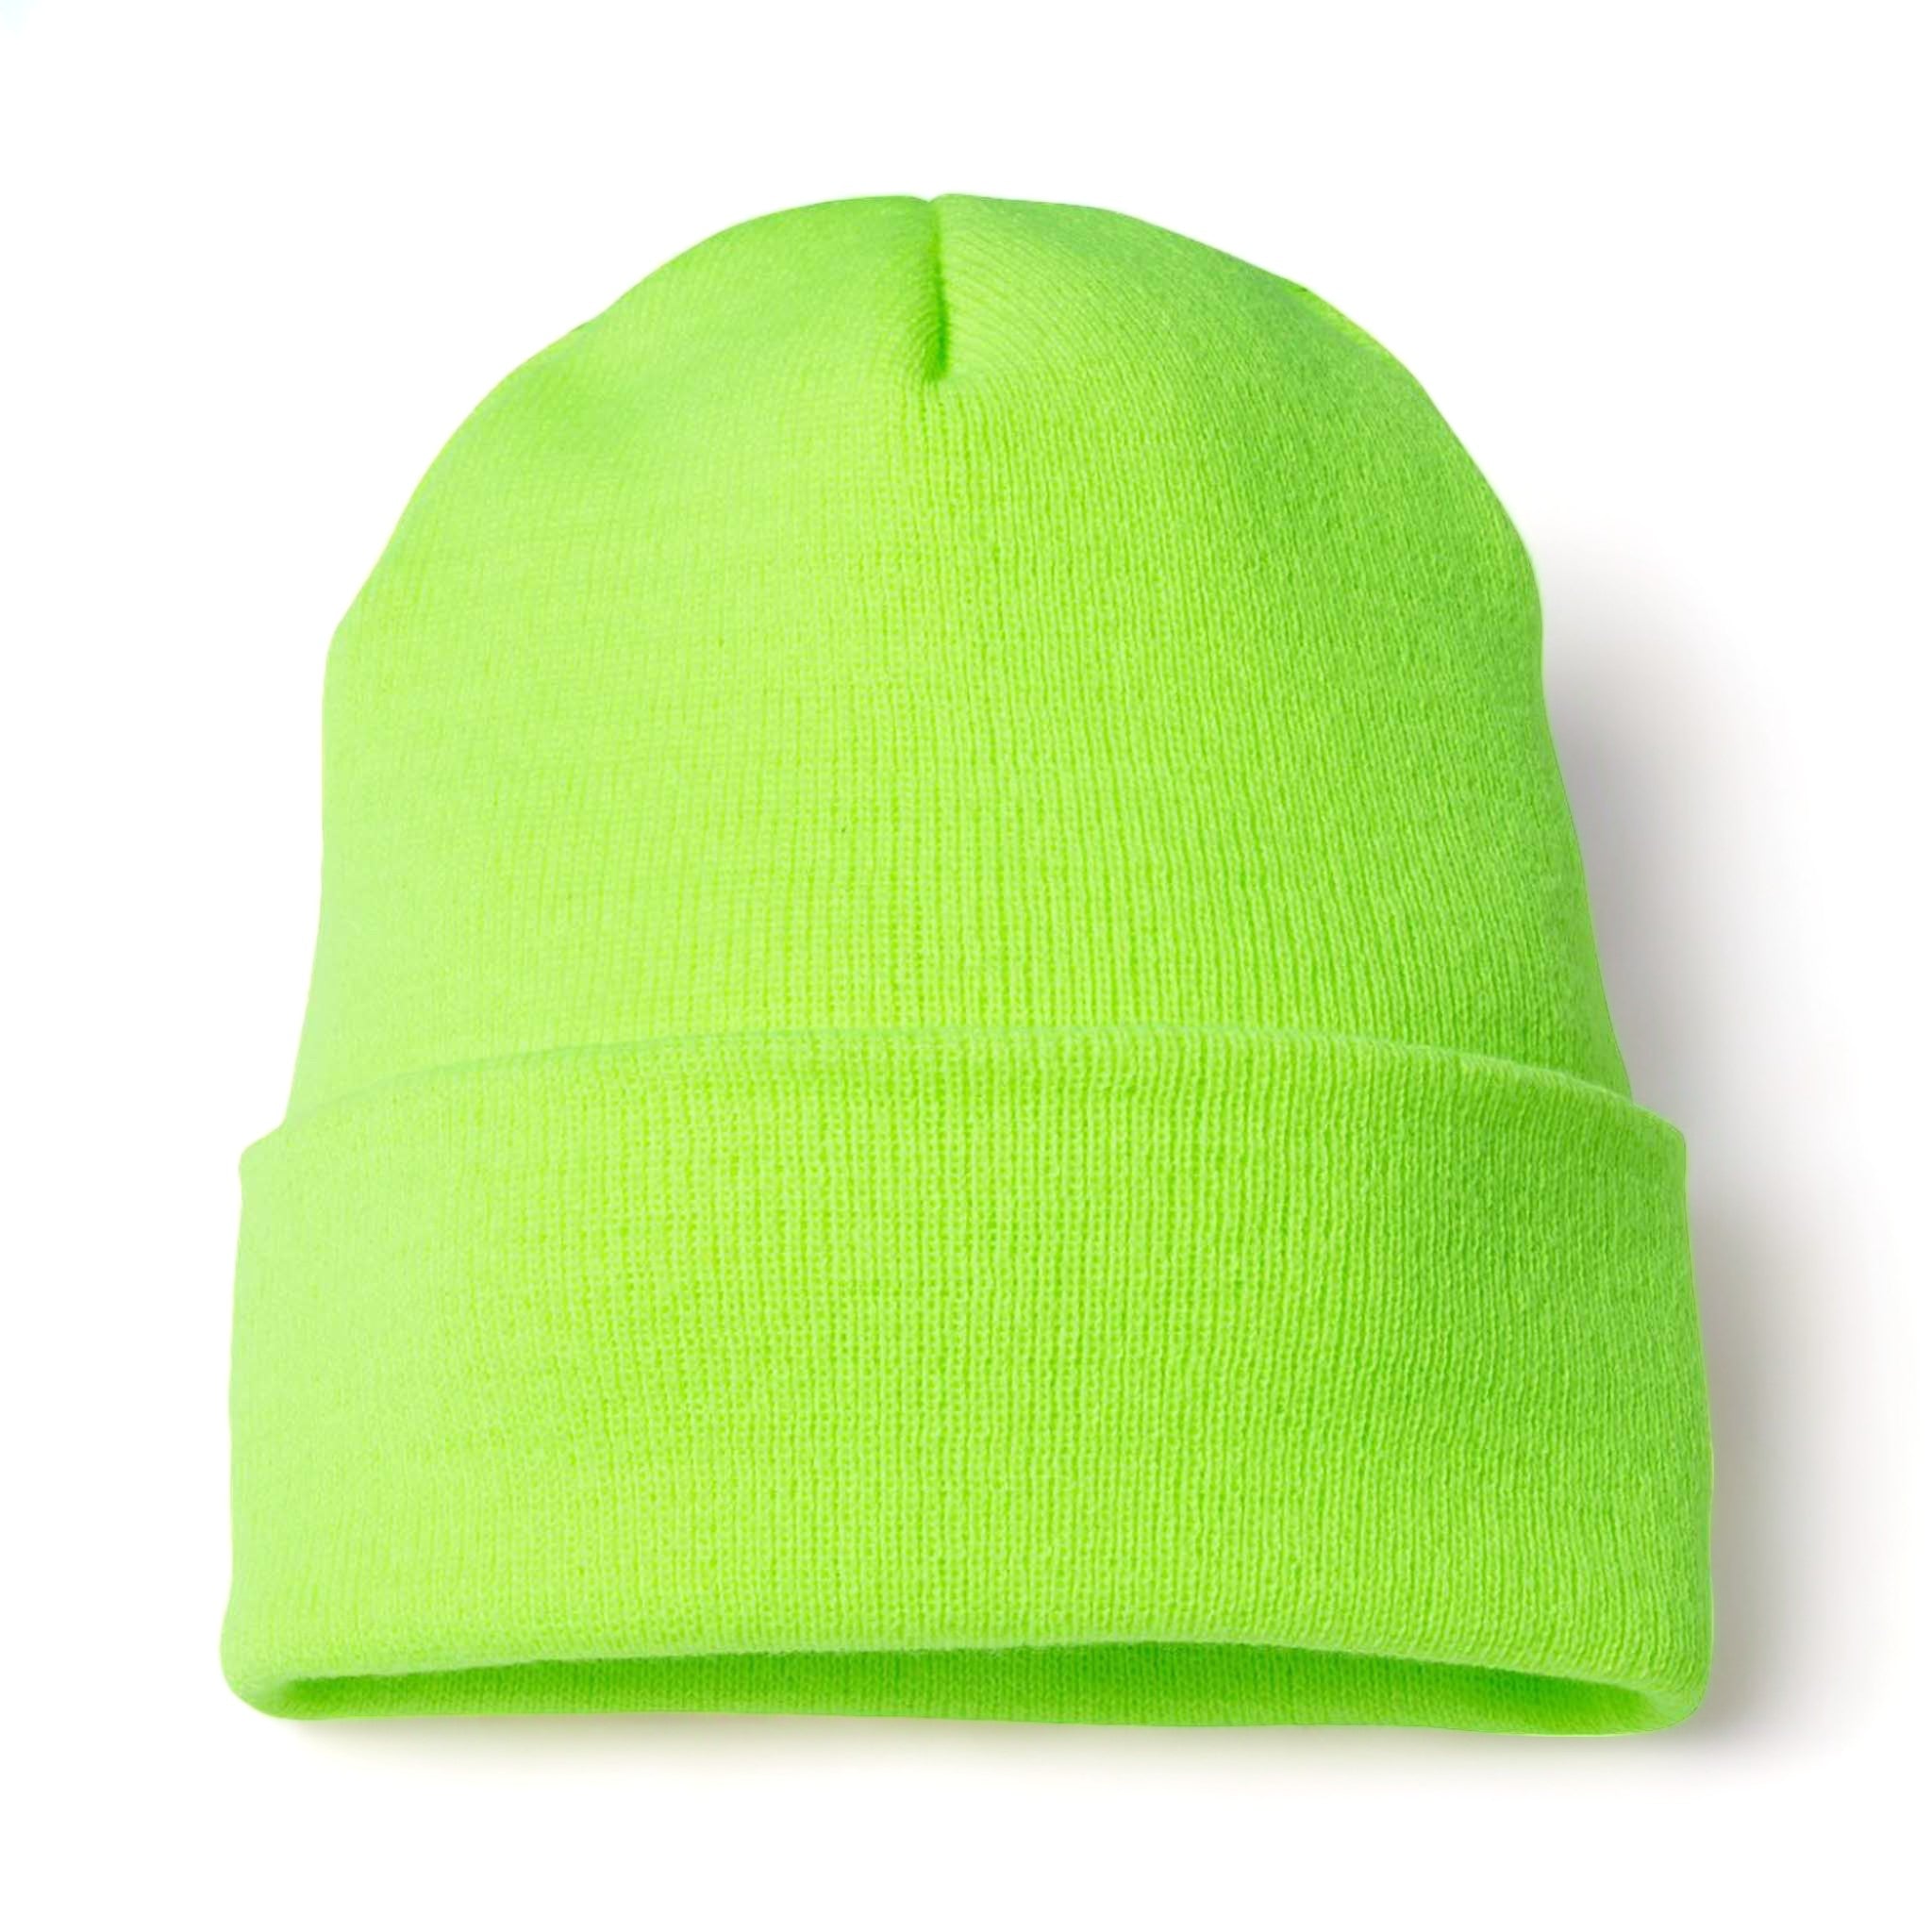 YP Classics 1501KC custom beanie in safety green